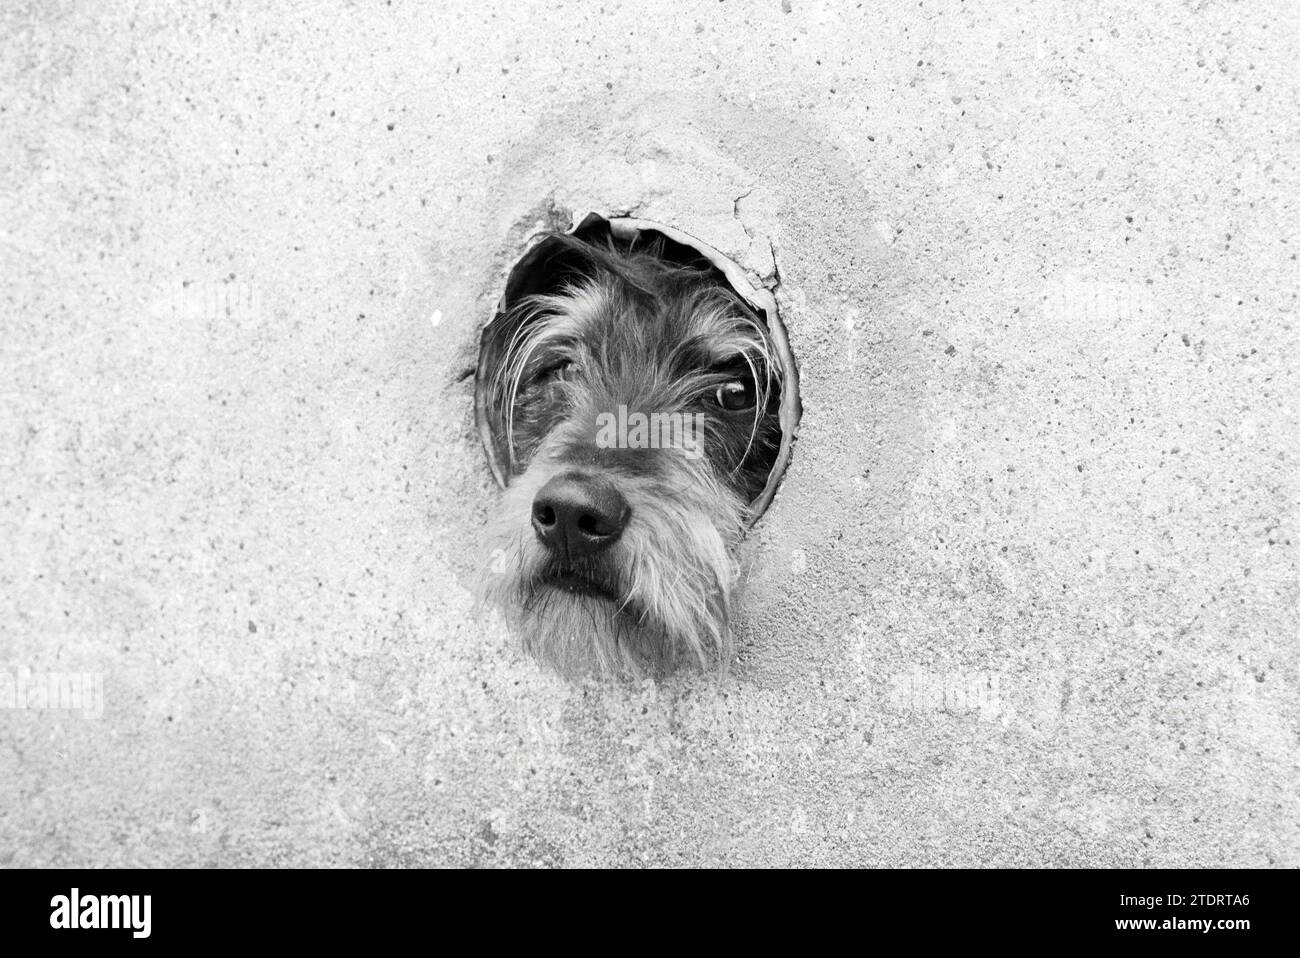 Dog in hole of wall, Dogs, 09-04-1980, Whizgle News from the Past, Tailored for the Future. Explore historical narratives, Dutch The Netherlands agency image with a modern perspective, bridging the gap between yesterday's events and tomorrow's insights. A timeless journey shaping the stories that shape our future Stock Photo